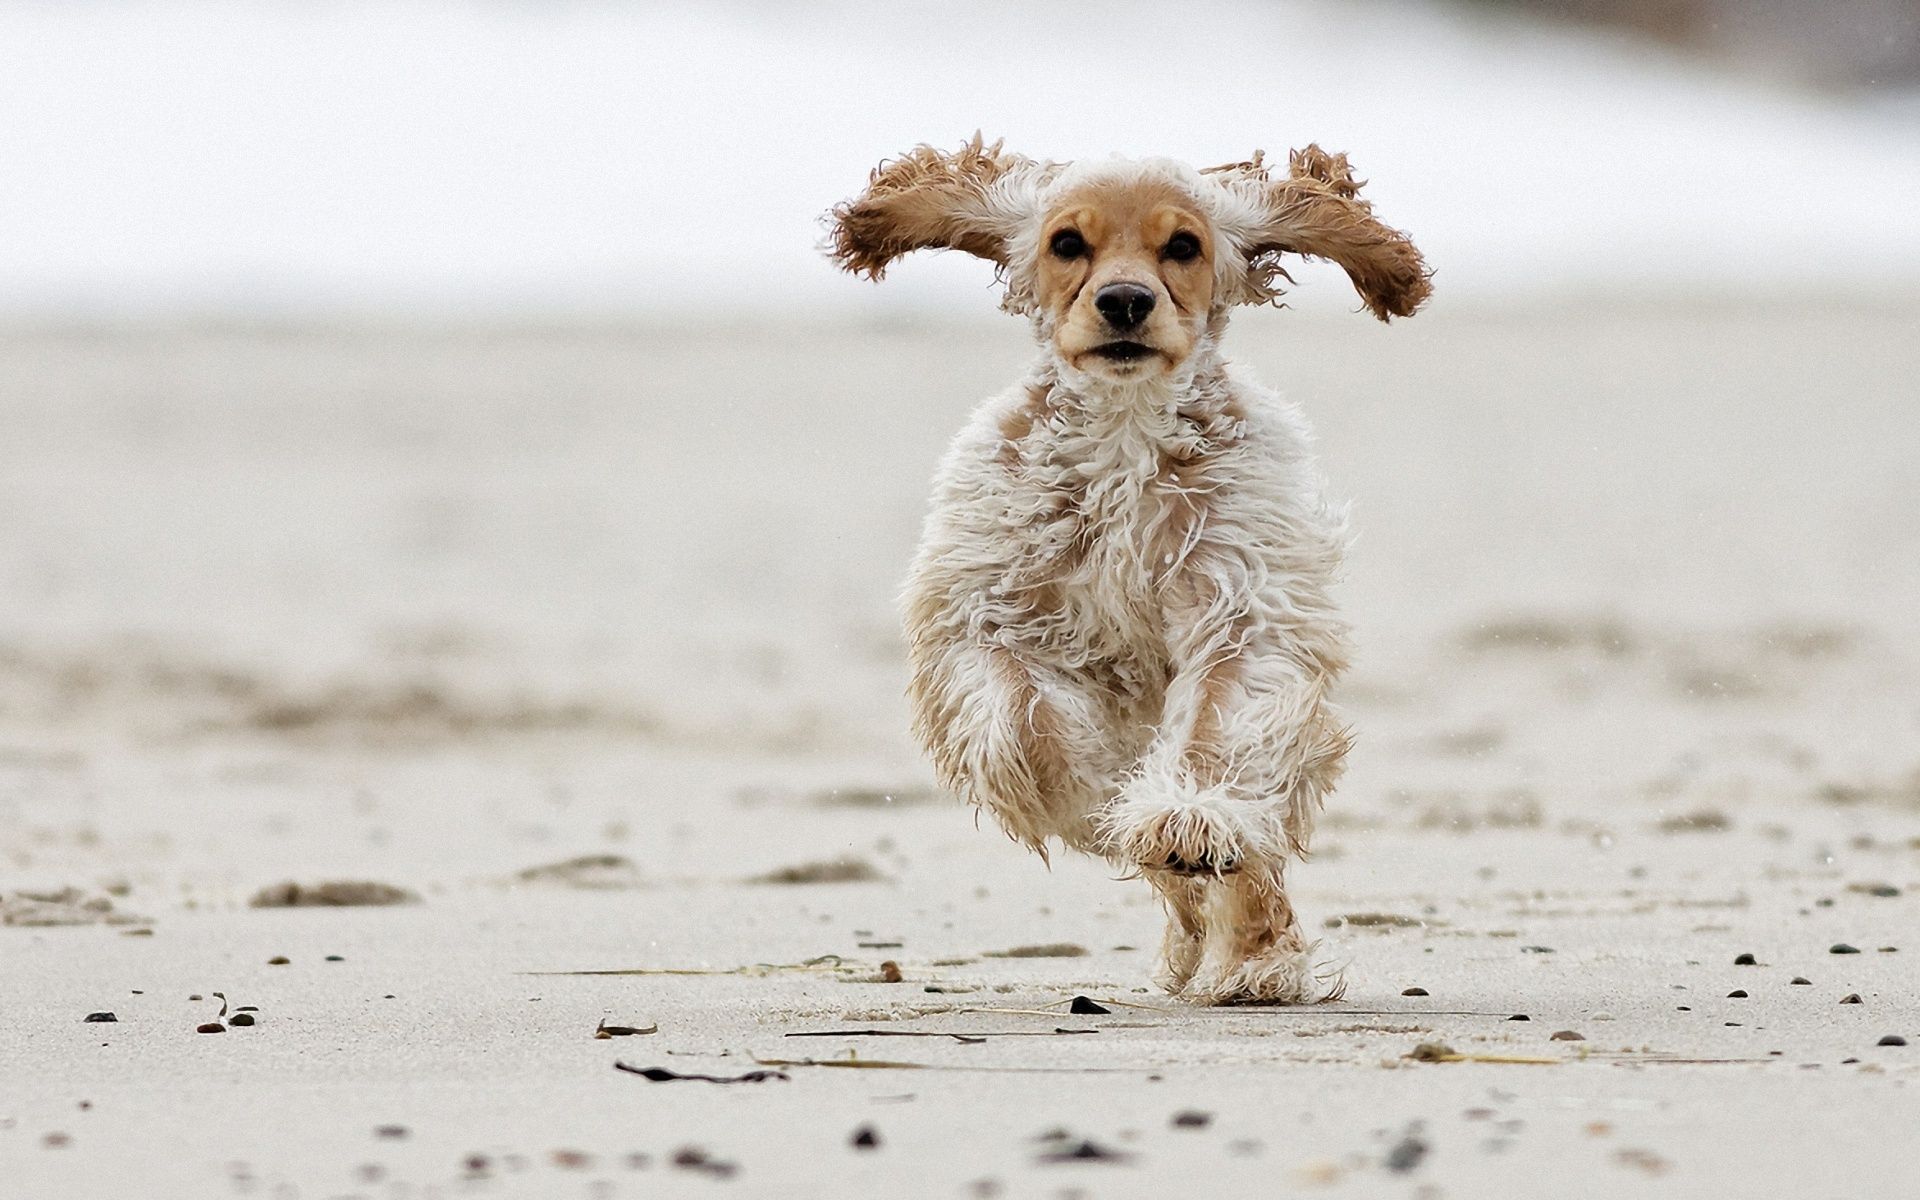 American Cocker Spaniel running on sand wallpapers and images ...